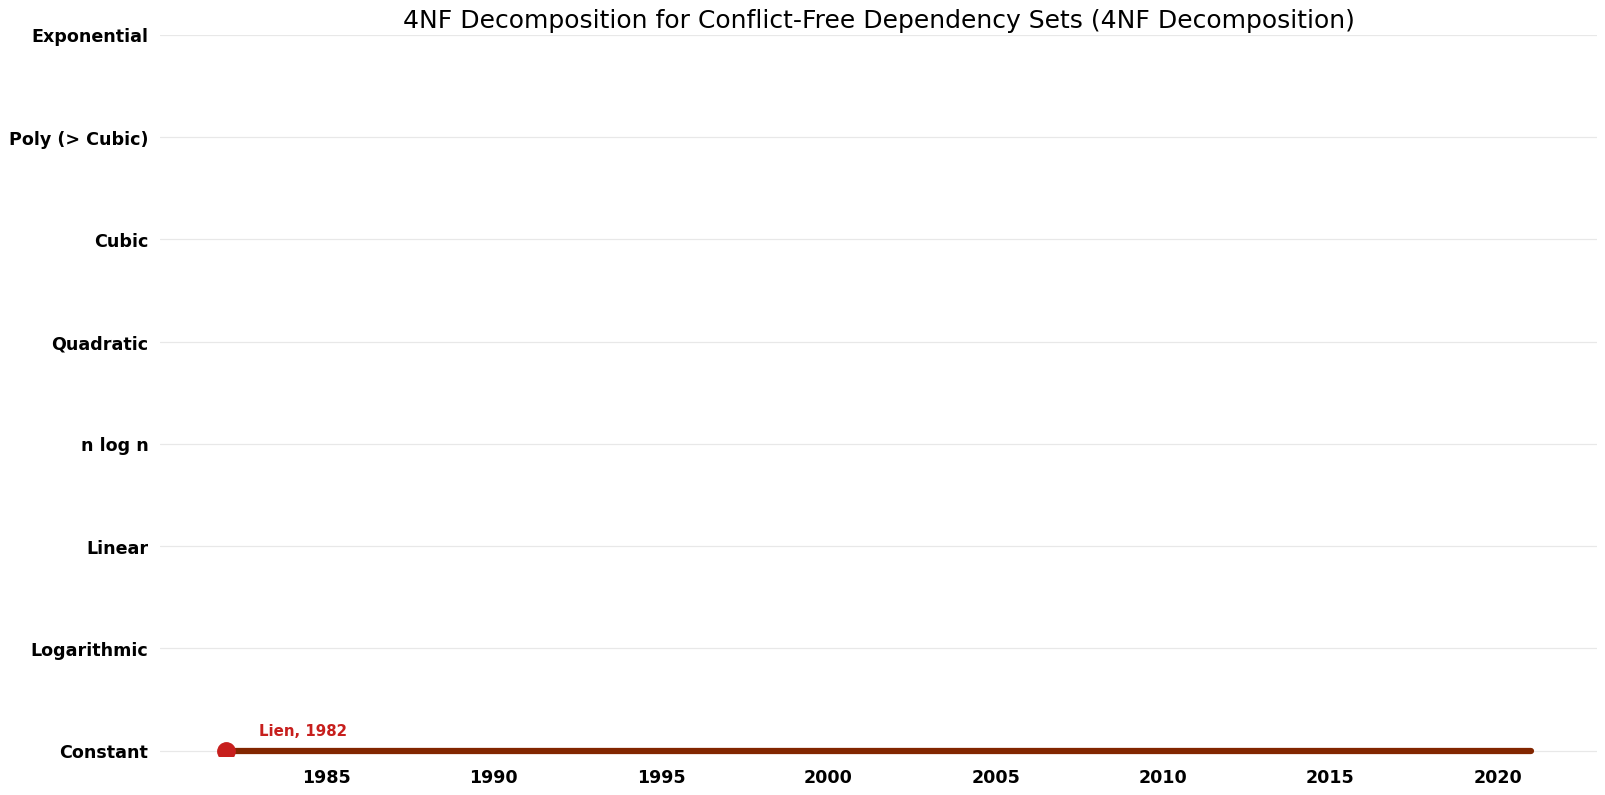 4NF Decomposition - 4NF Decomposition for Conflict-Free Dependency Sets - Space.png